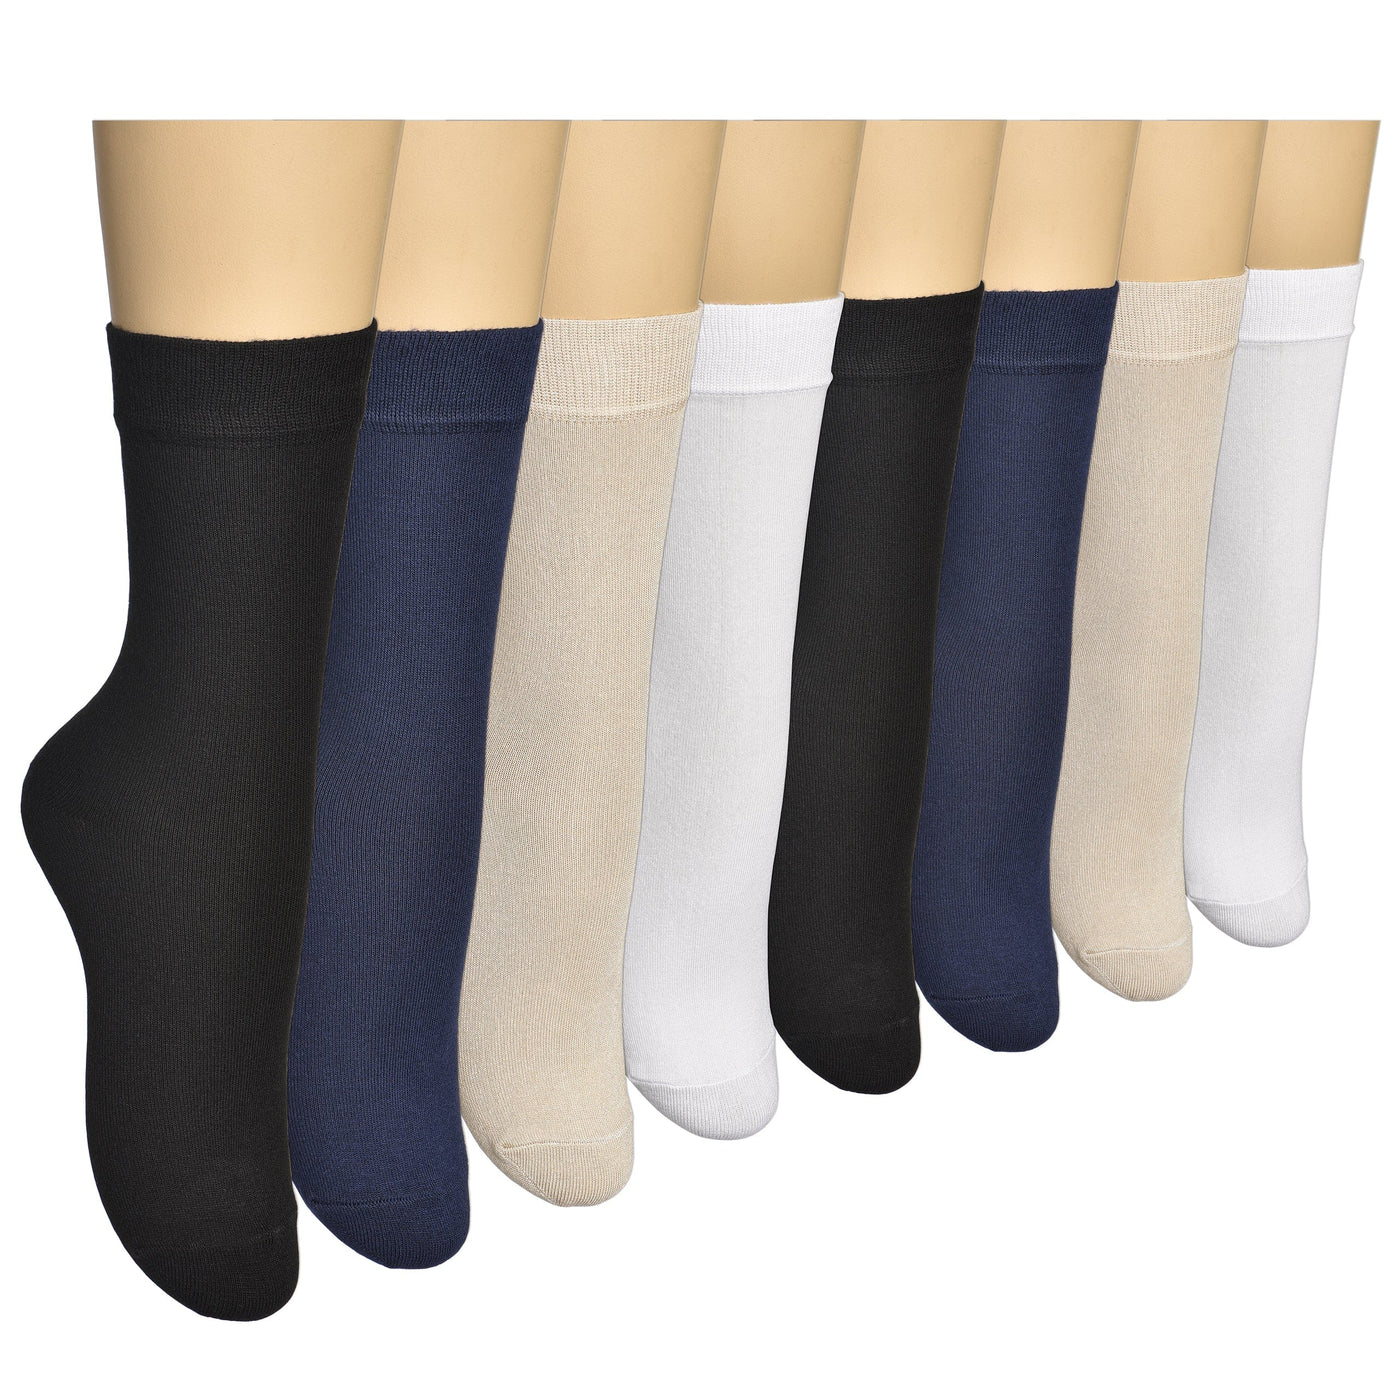 Elyfer Womens Thin Bamboo Dress Socks Seamless Toe - Above Ankle - Soft - Durable - Breathable 8 Pairs #color_mix